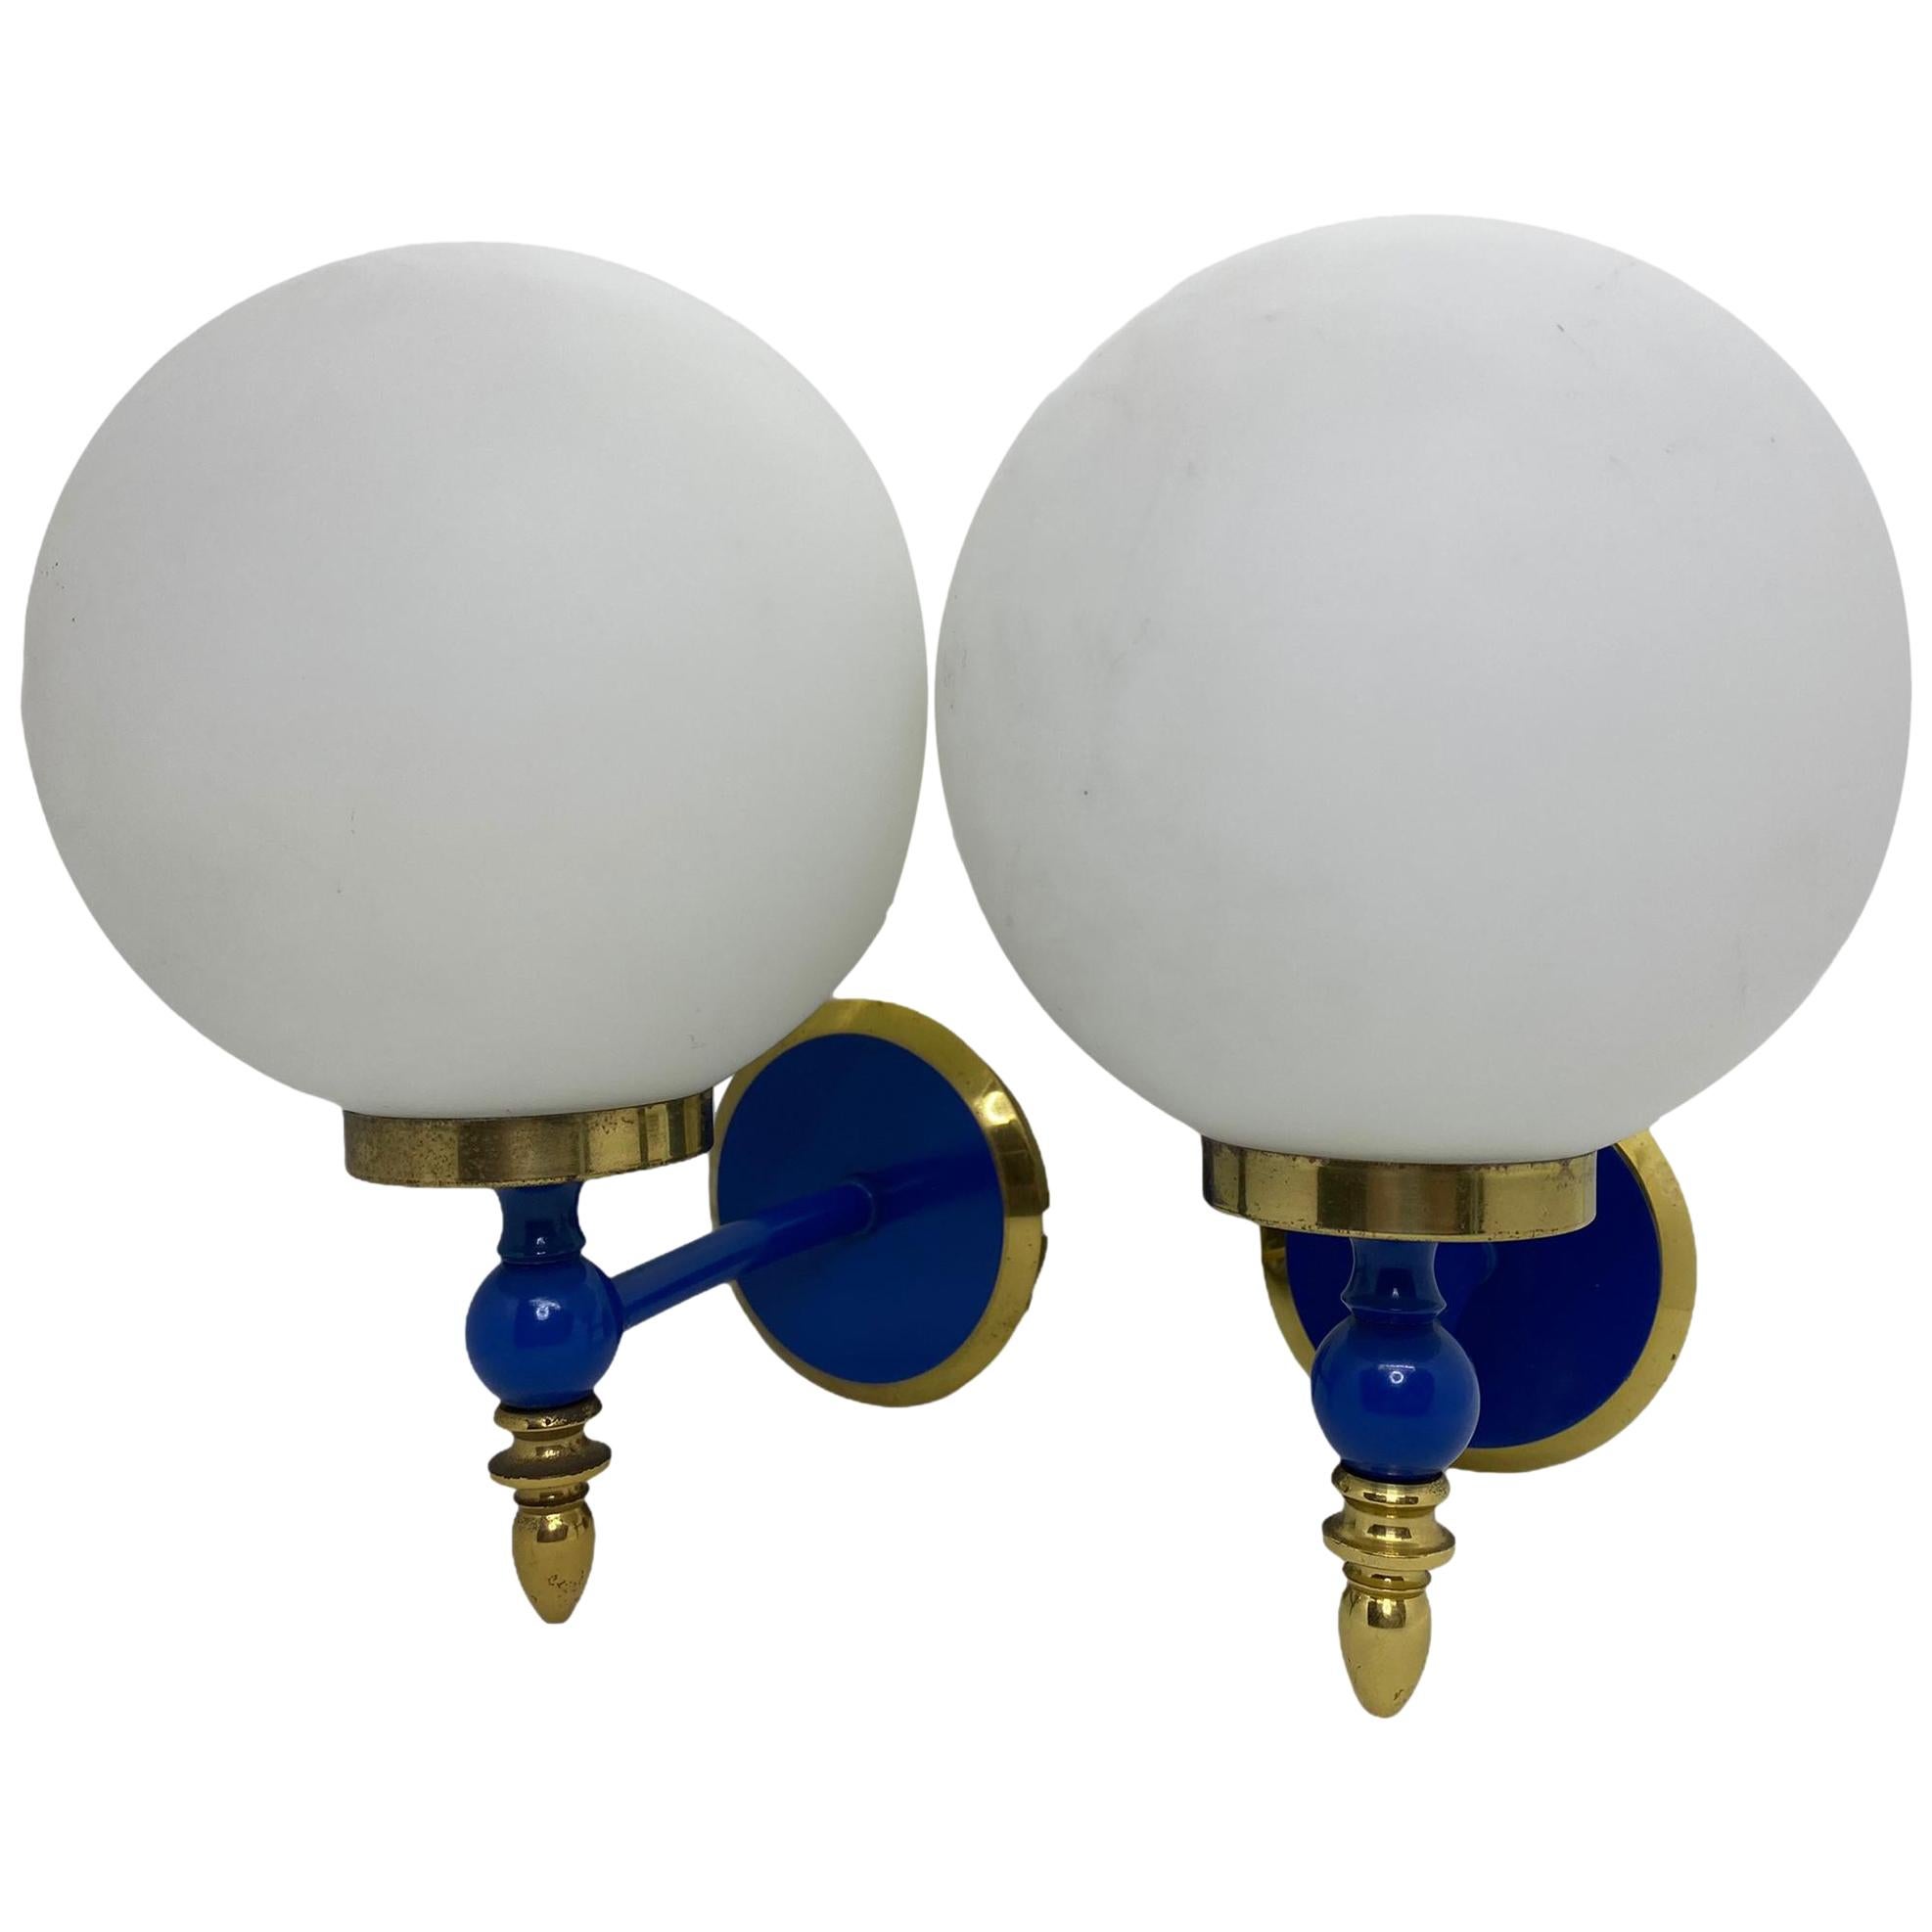 Pair of Art Deco Style Blue Lacquered Brass and Milk Glass Sconces, Germany